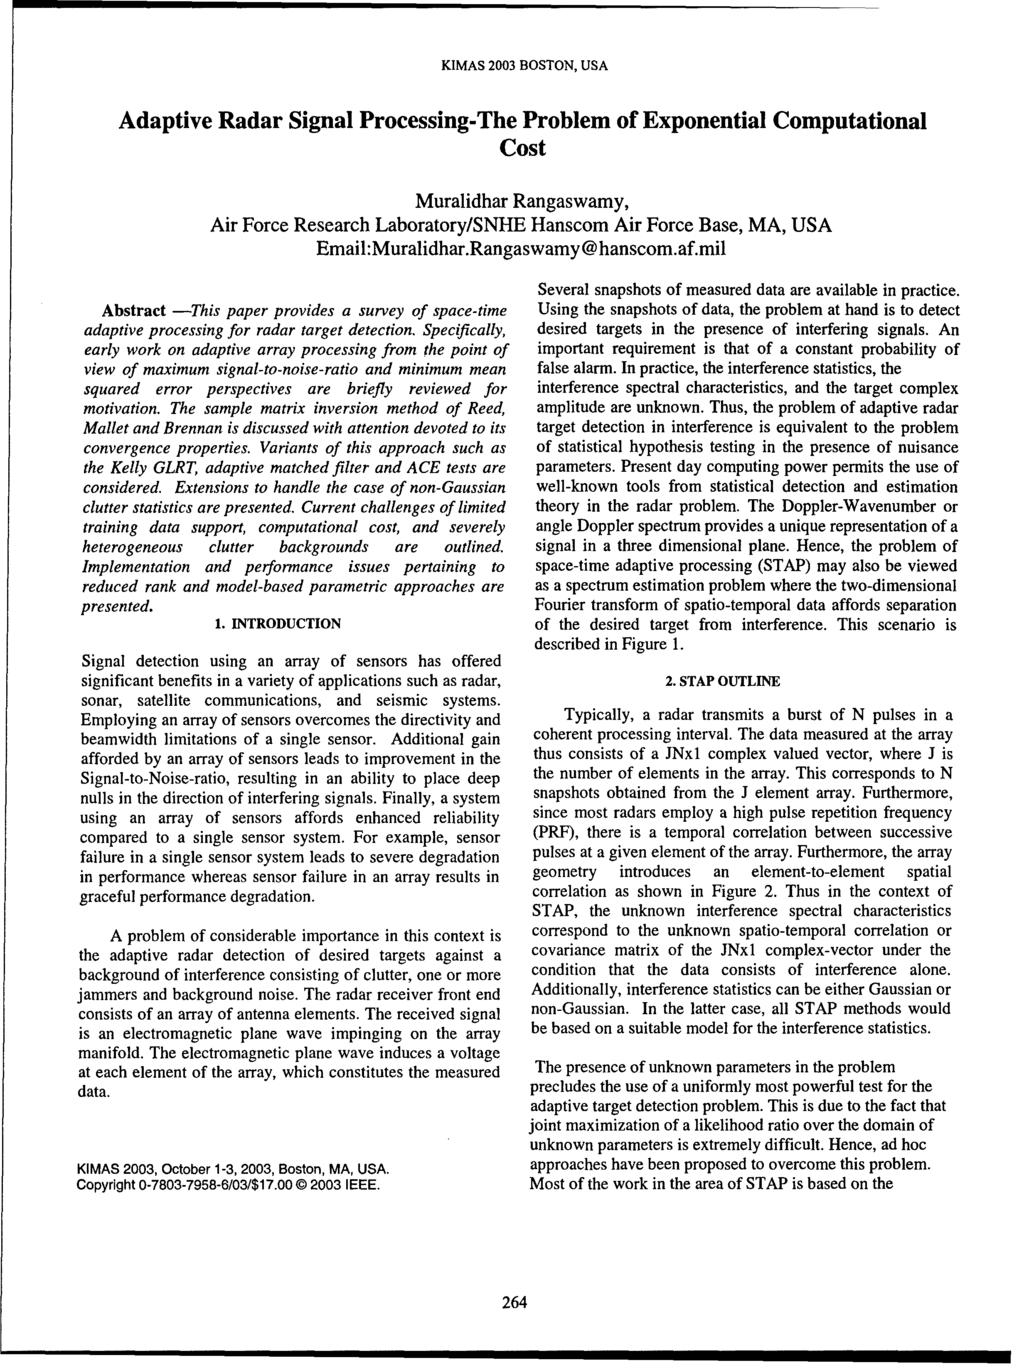 Adaptive Radar Signal Processing-The Problem of Exponential Computational Cost Muralidhar Rangaswamy, Air Force Research Laboratory/SNHE Hanscom Air Force Base, MA, USA Email:Muralidhar.